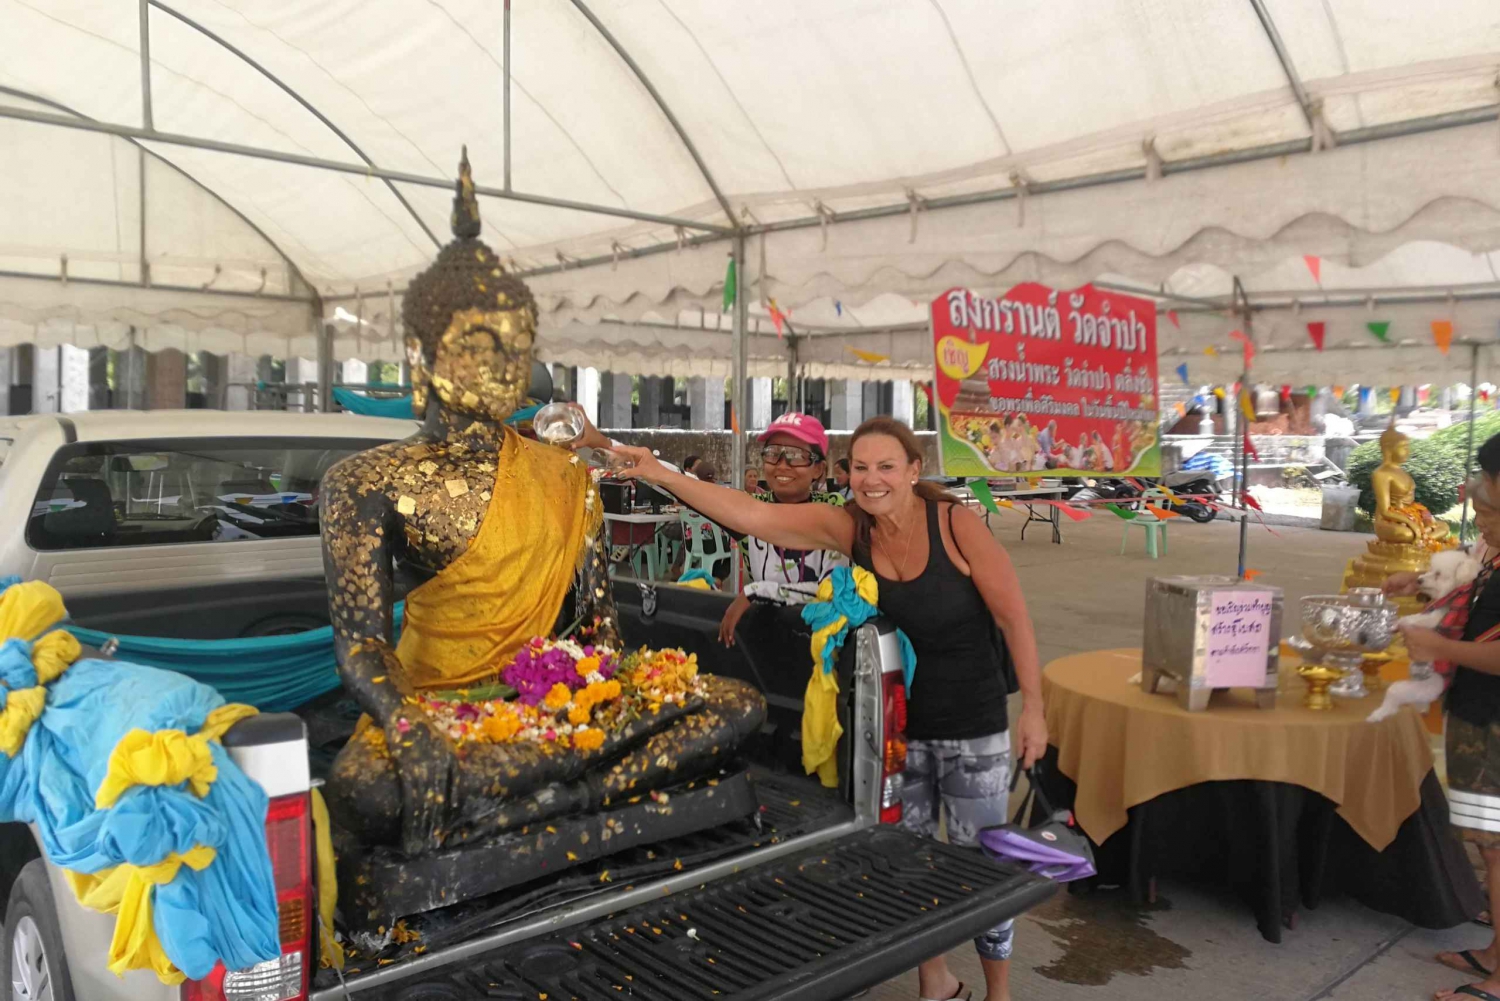 Bangkok: Floating Market Tour by Bike and Boat with Lunch